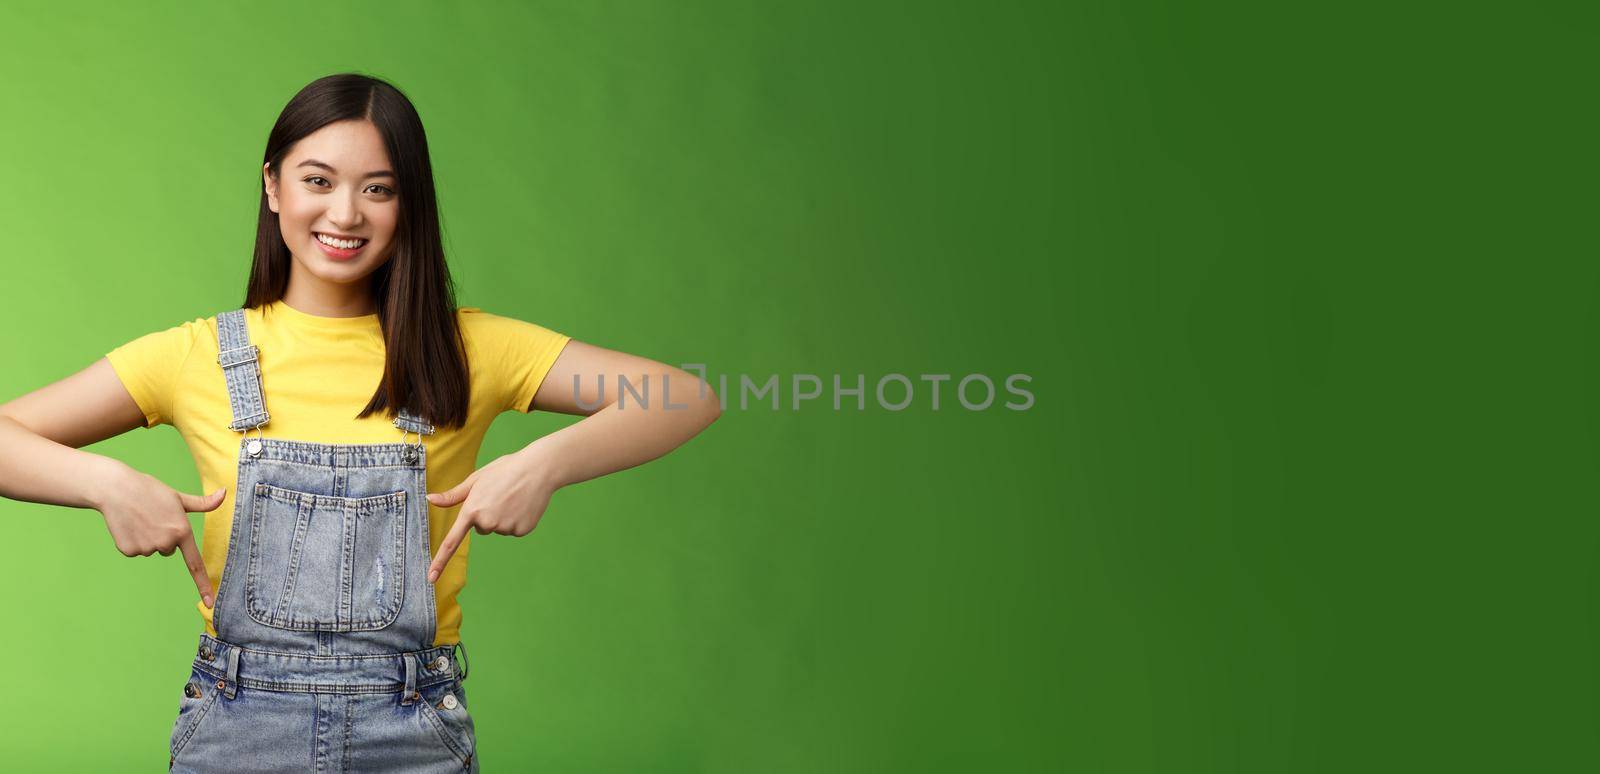 friendly outgoing cute asian young woman show fingers down, introduce new promo app, smiling joyfully sharing link, recommend product using brand, grinning toothy, green background. Copy space